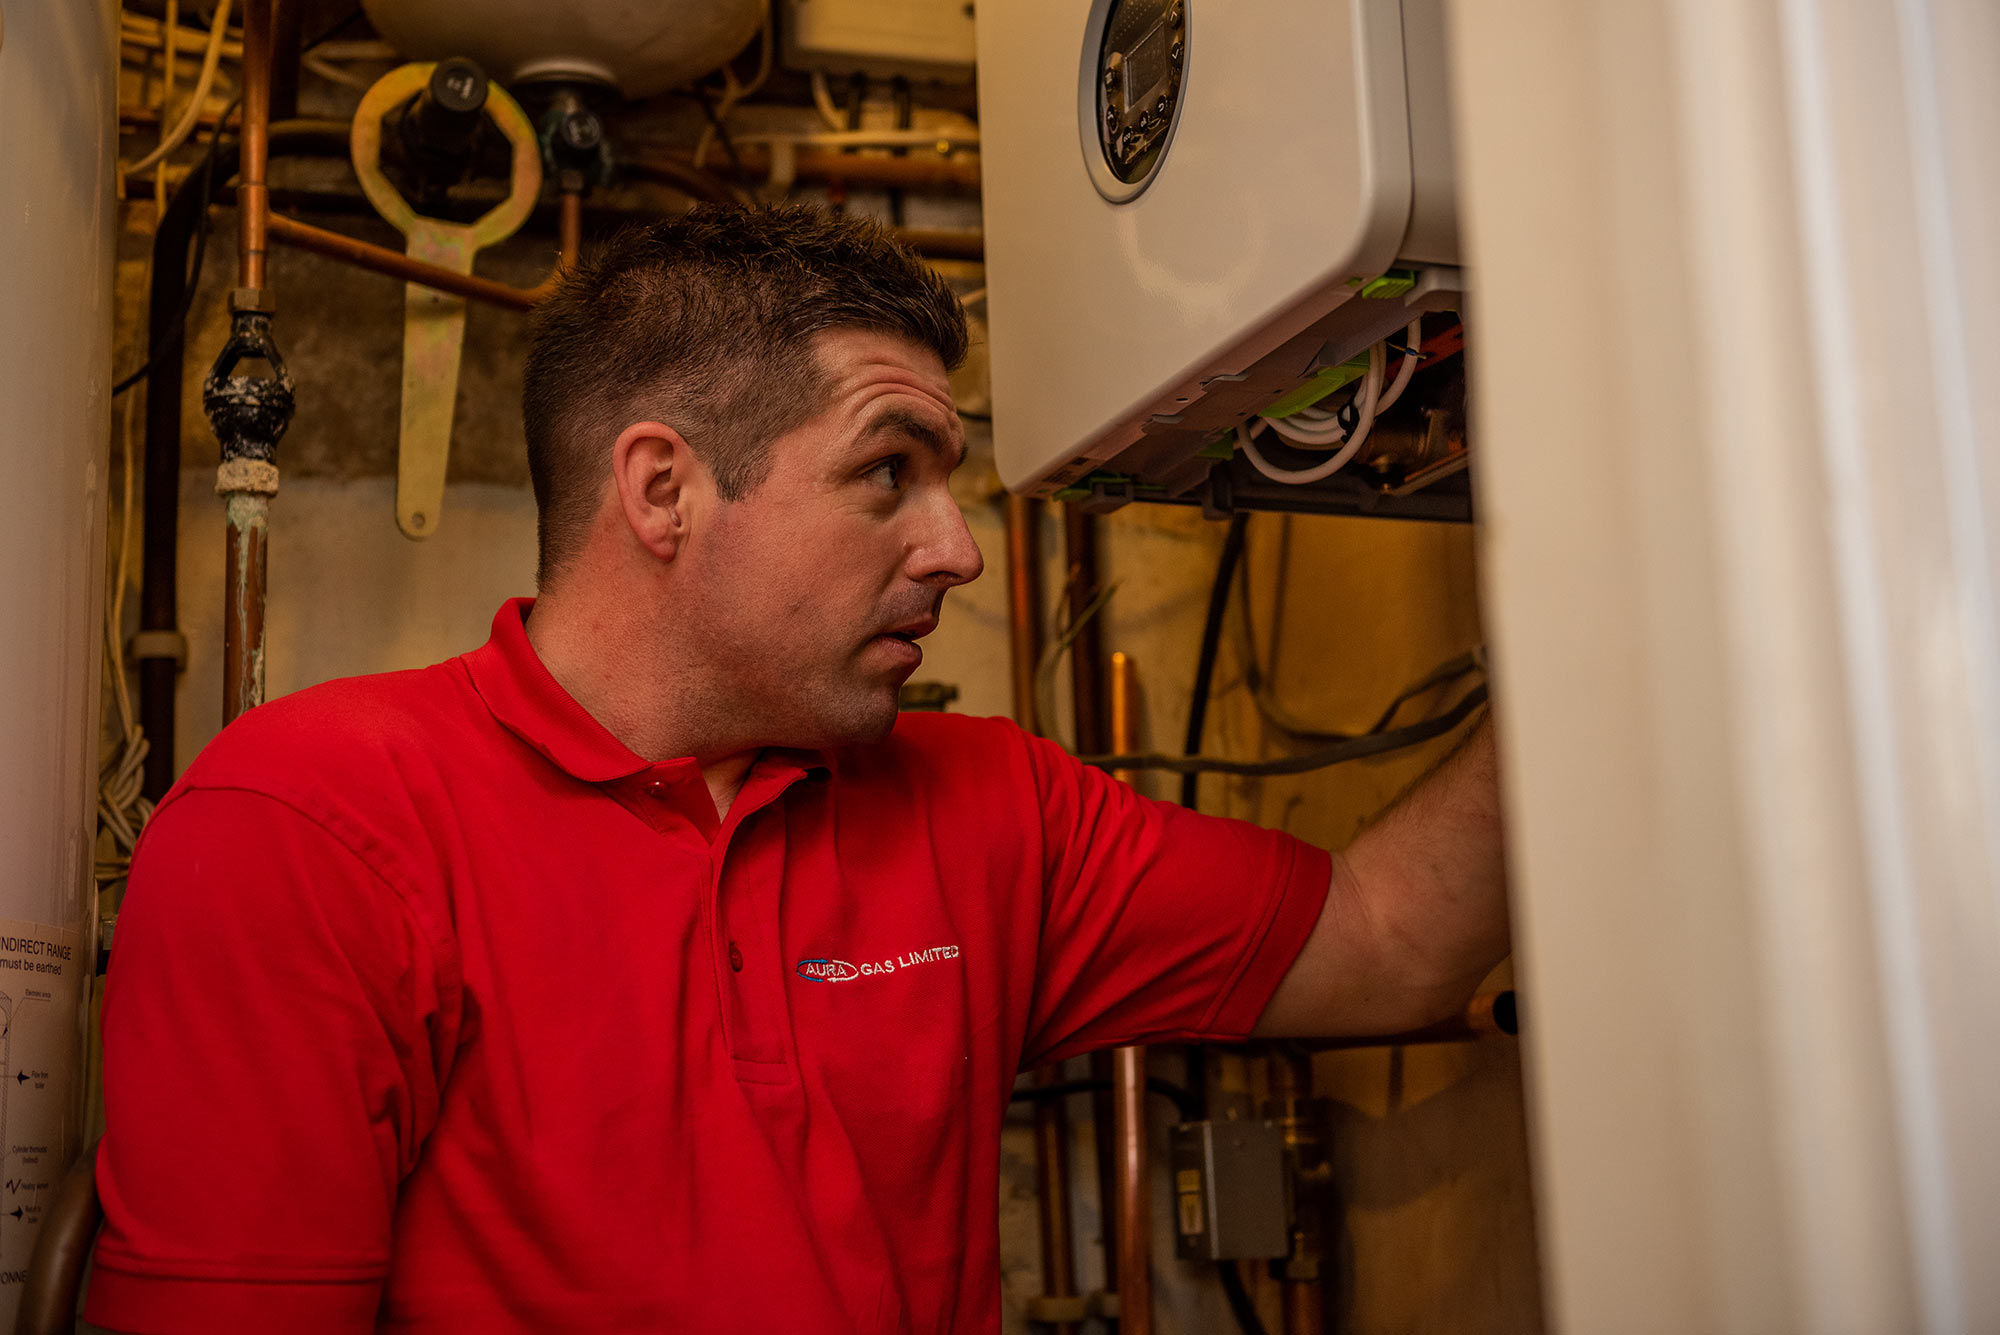 My Boiler Has Lost Pressure – What Do I Do?